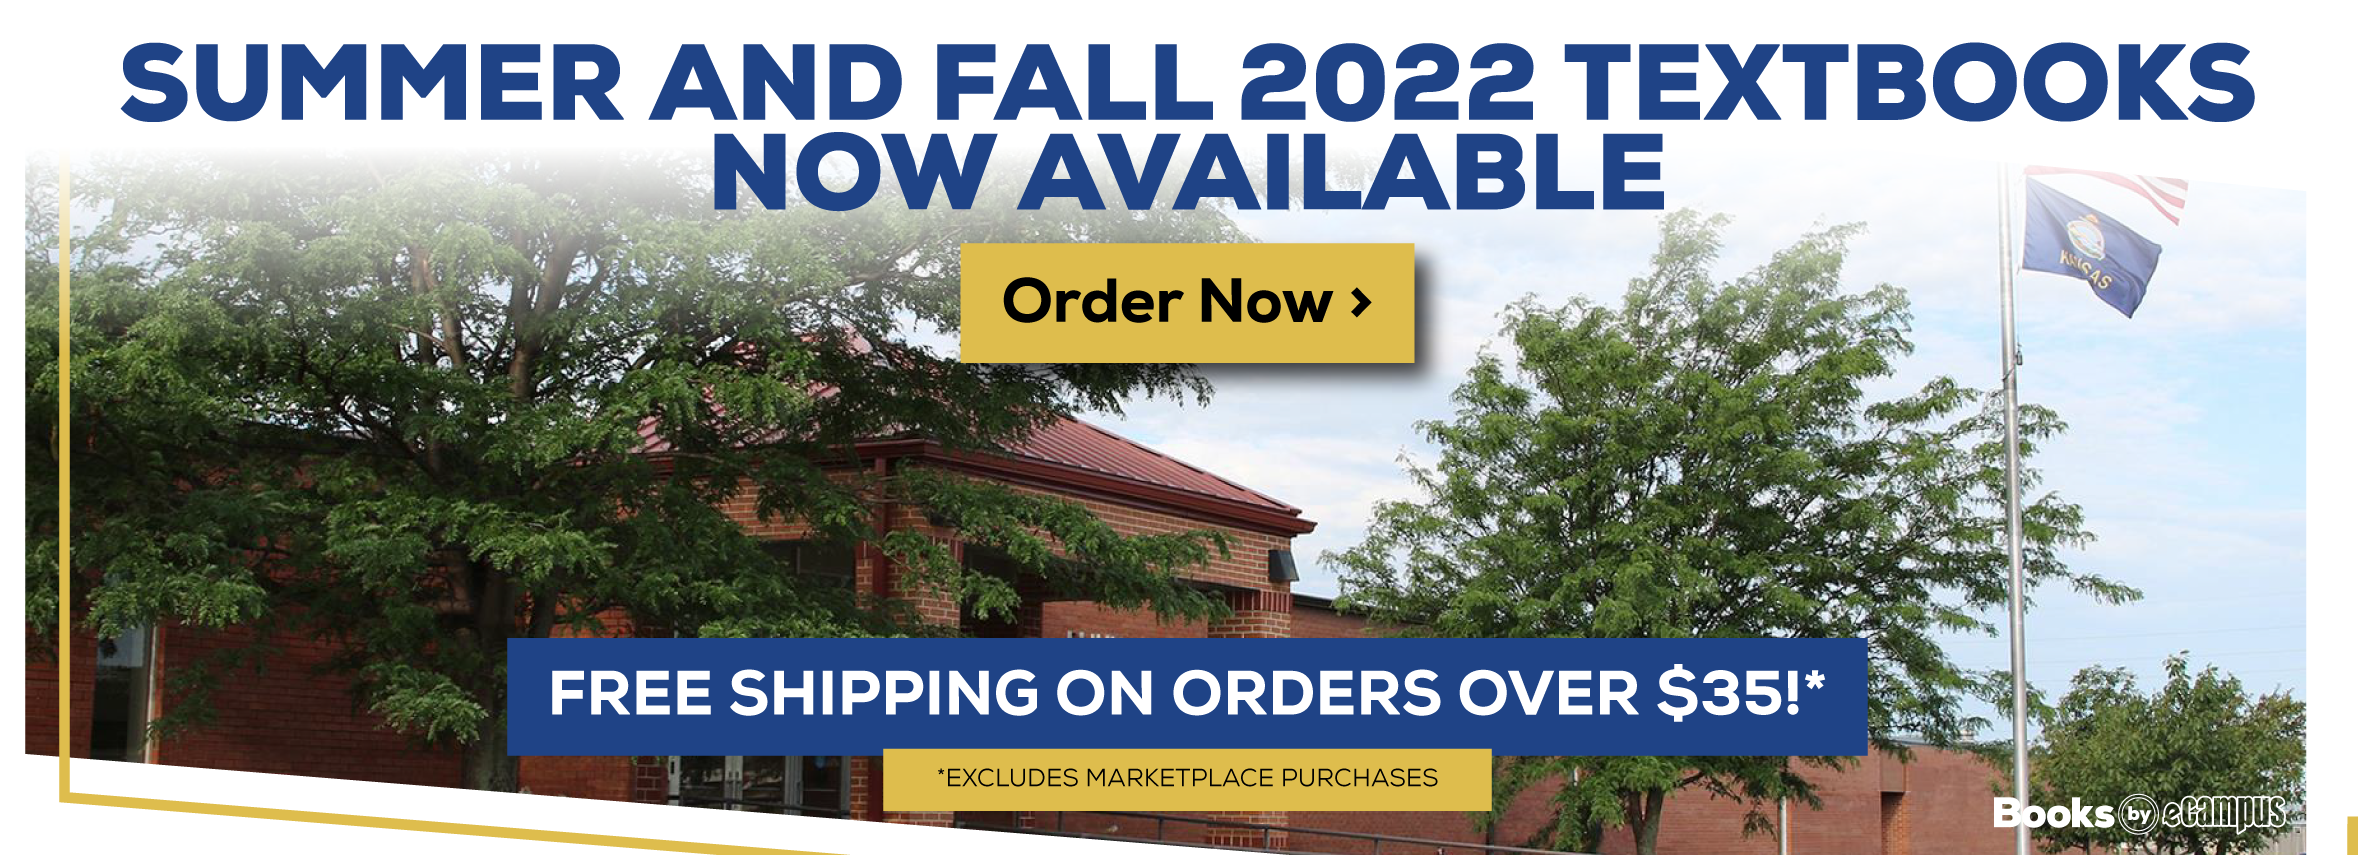 Summer and Fall 2022 Textbooks Now Available. Free shipping on orders over $35. Excludes marketplace purchases. Order Now